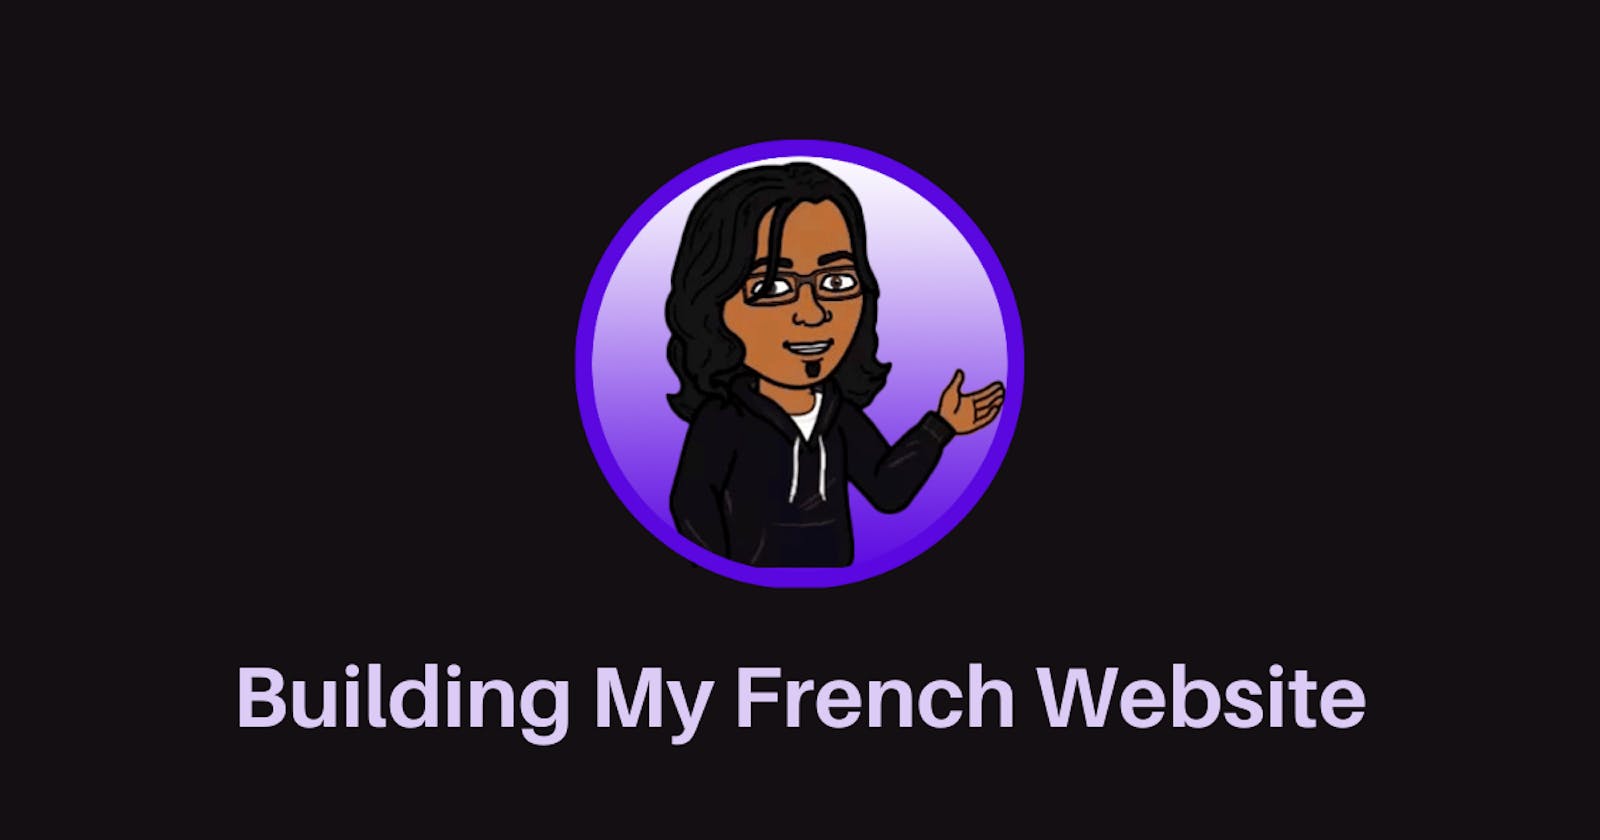 Building My French Website